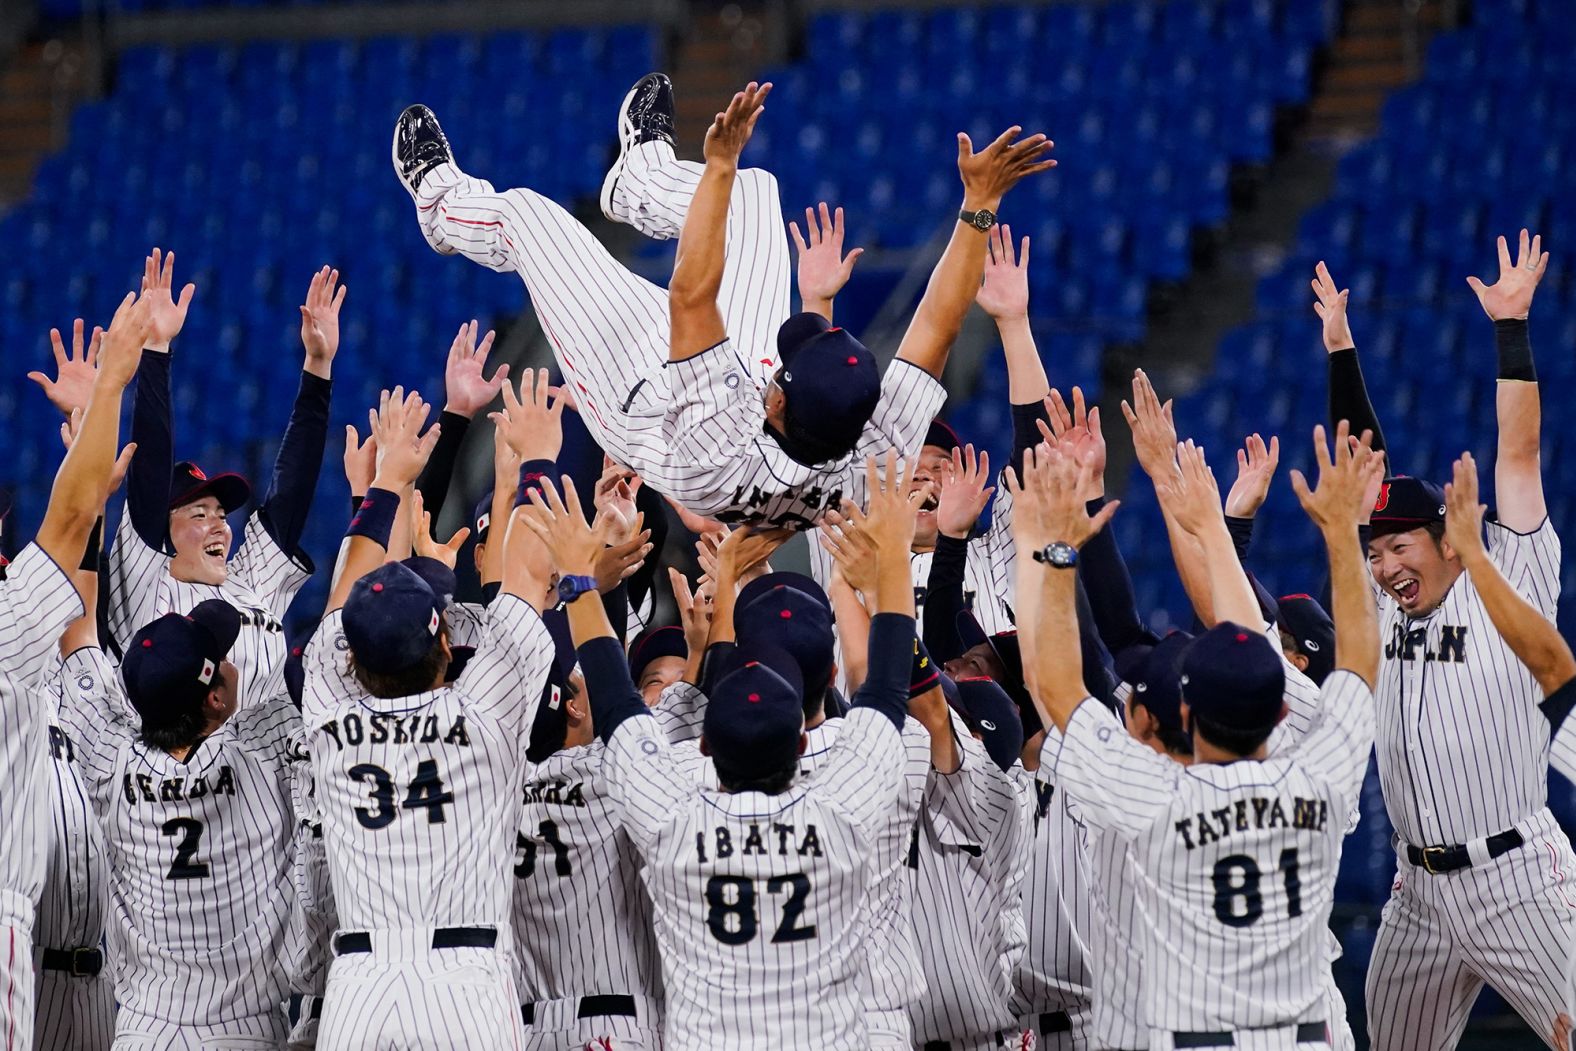 Japan's baseball team celebrates with manager Atsunori Inaba after <a href="index.php?page=&url=https%3A%2F%2Fwww.cnn.com%2Fworld%2Flive-news%2Ftokyo-2020-olympics-08-07-21-spt%2Fh_20d805ee1b60a343b67edab57c1bb89c" target="_blank">winning the gold-medal game</a> against the United States on August 7.